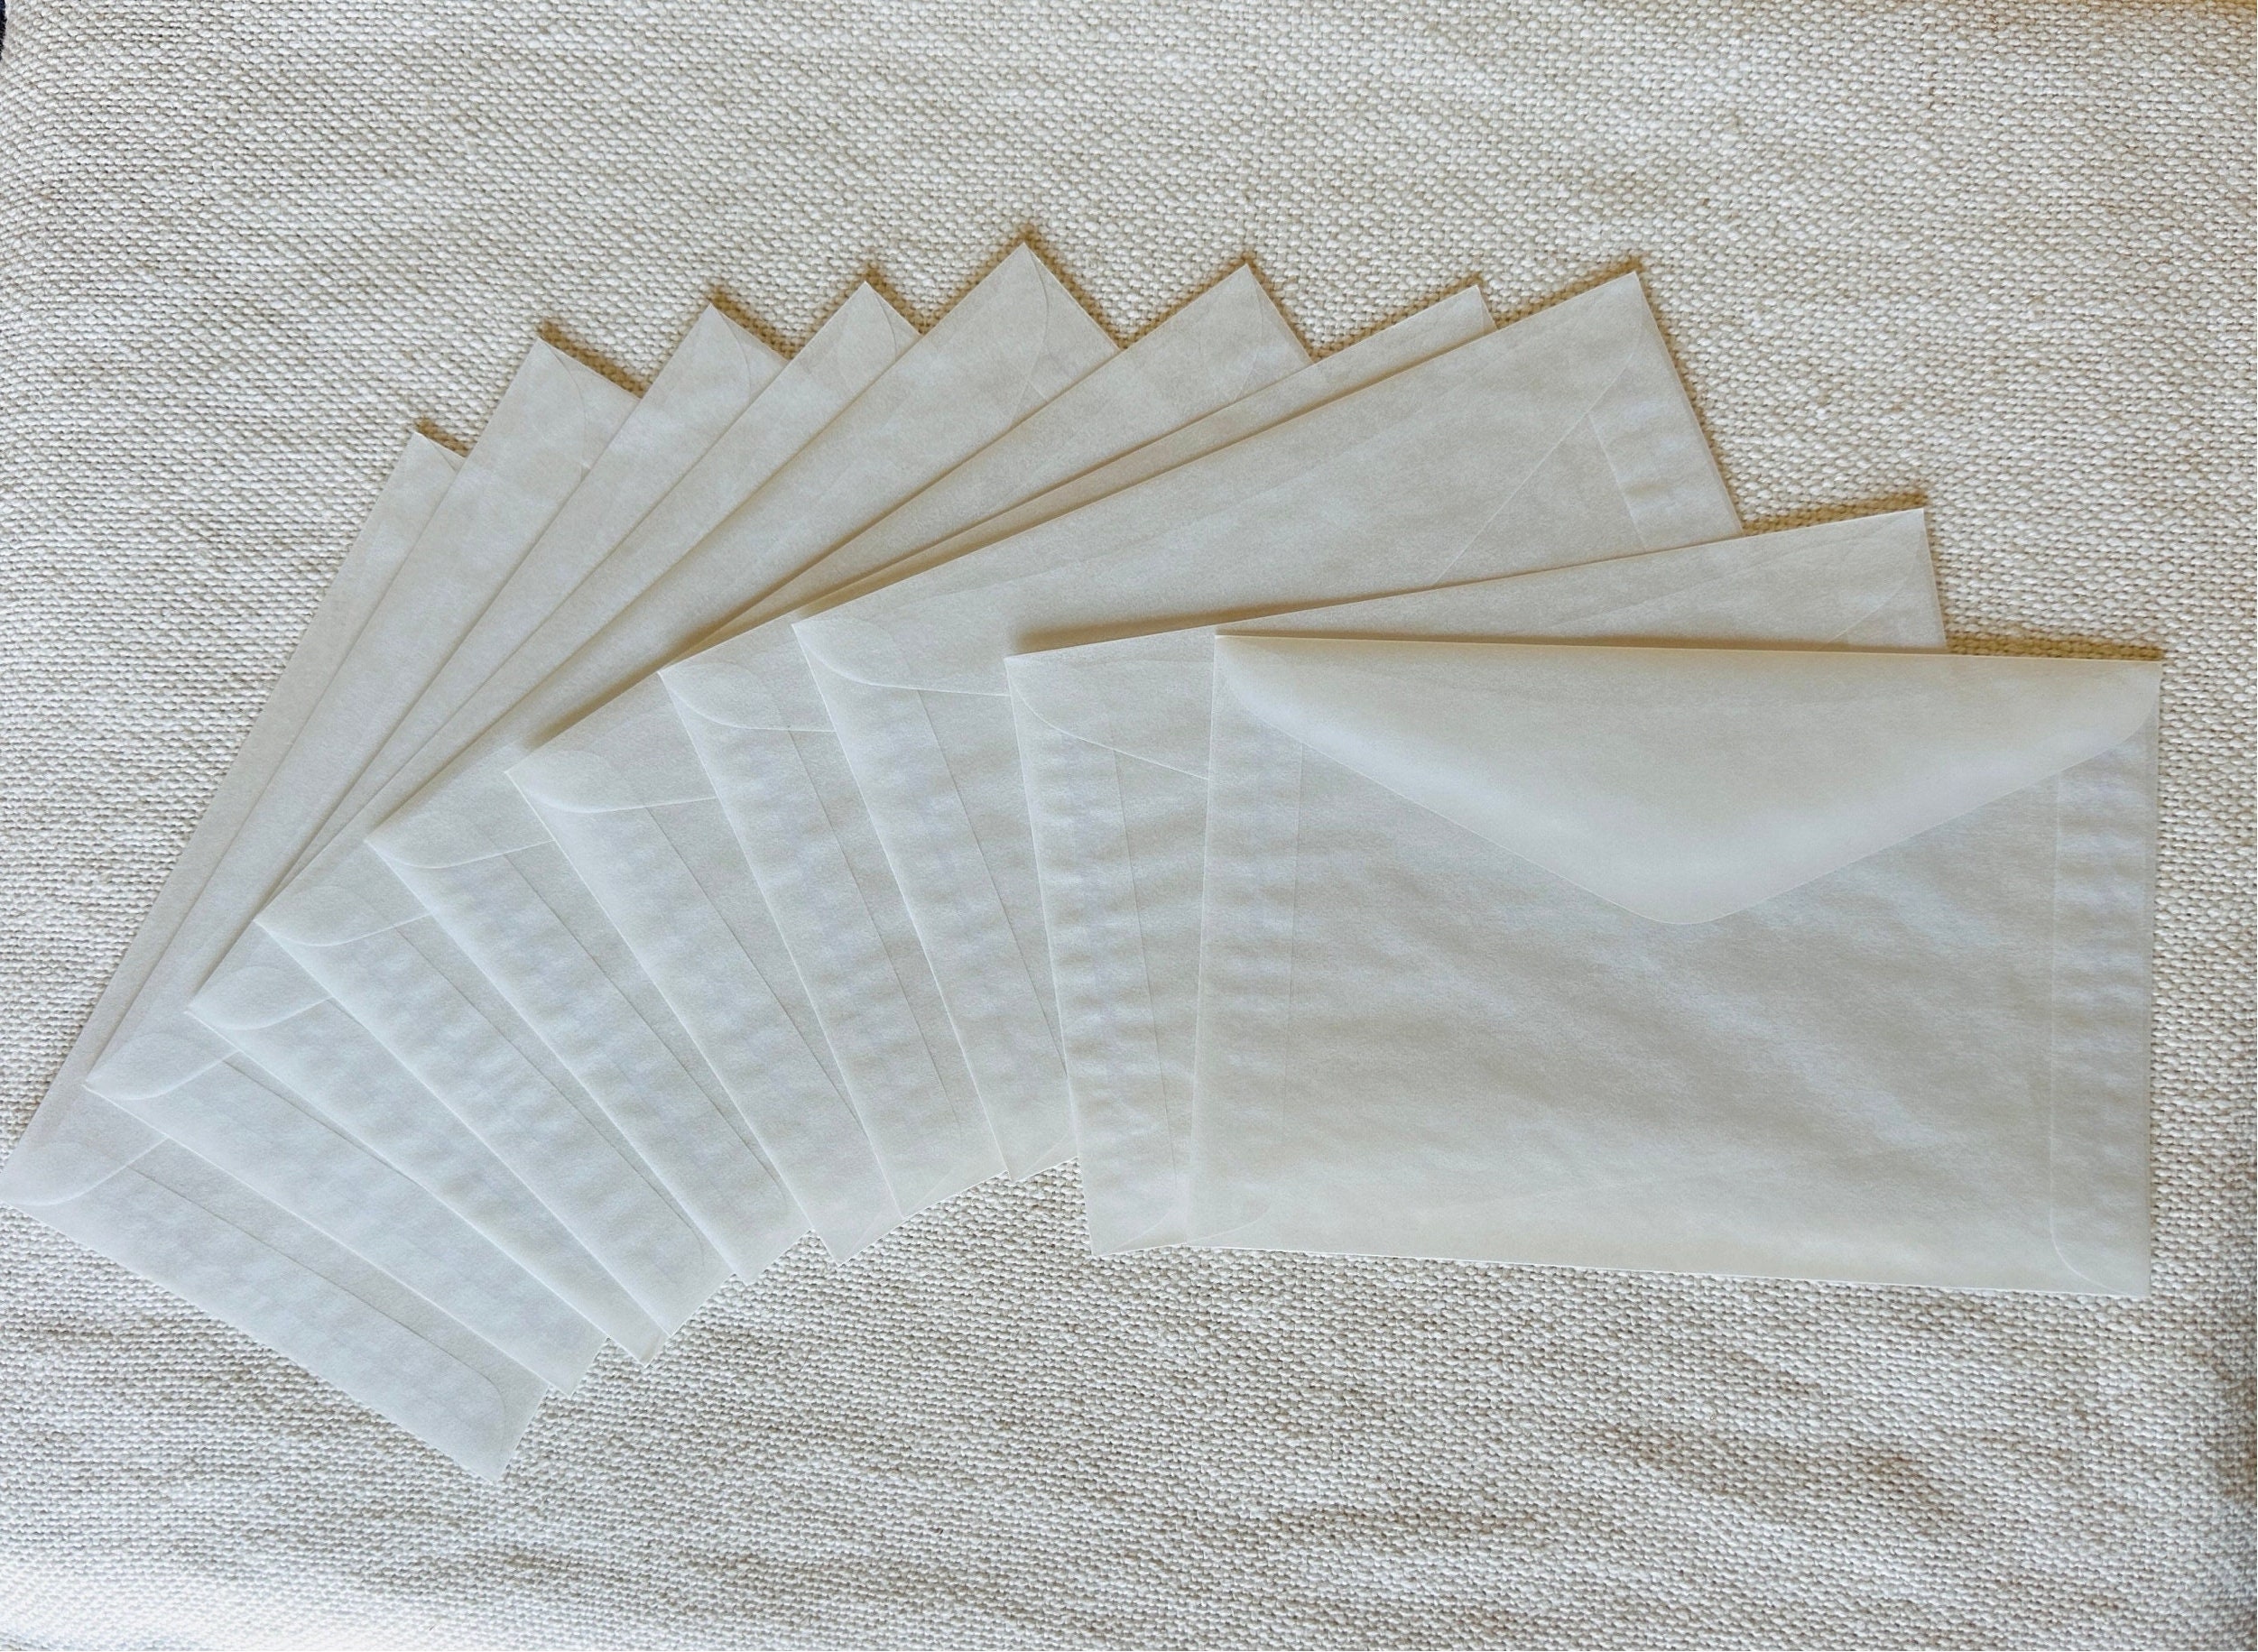 50 pack - flat glassine bags, 3.75 x 6.25 translucent waxed paper en -  TownSupply